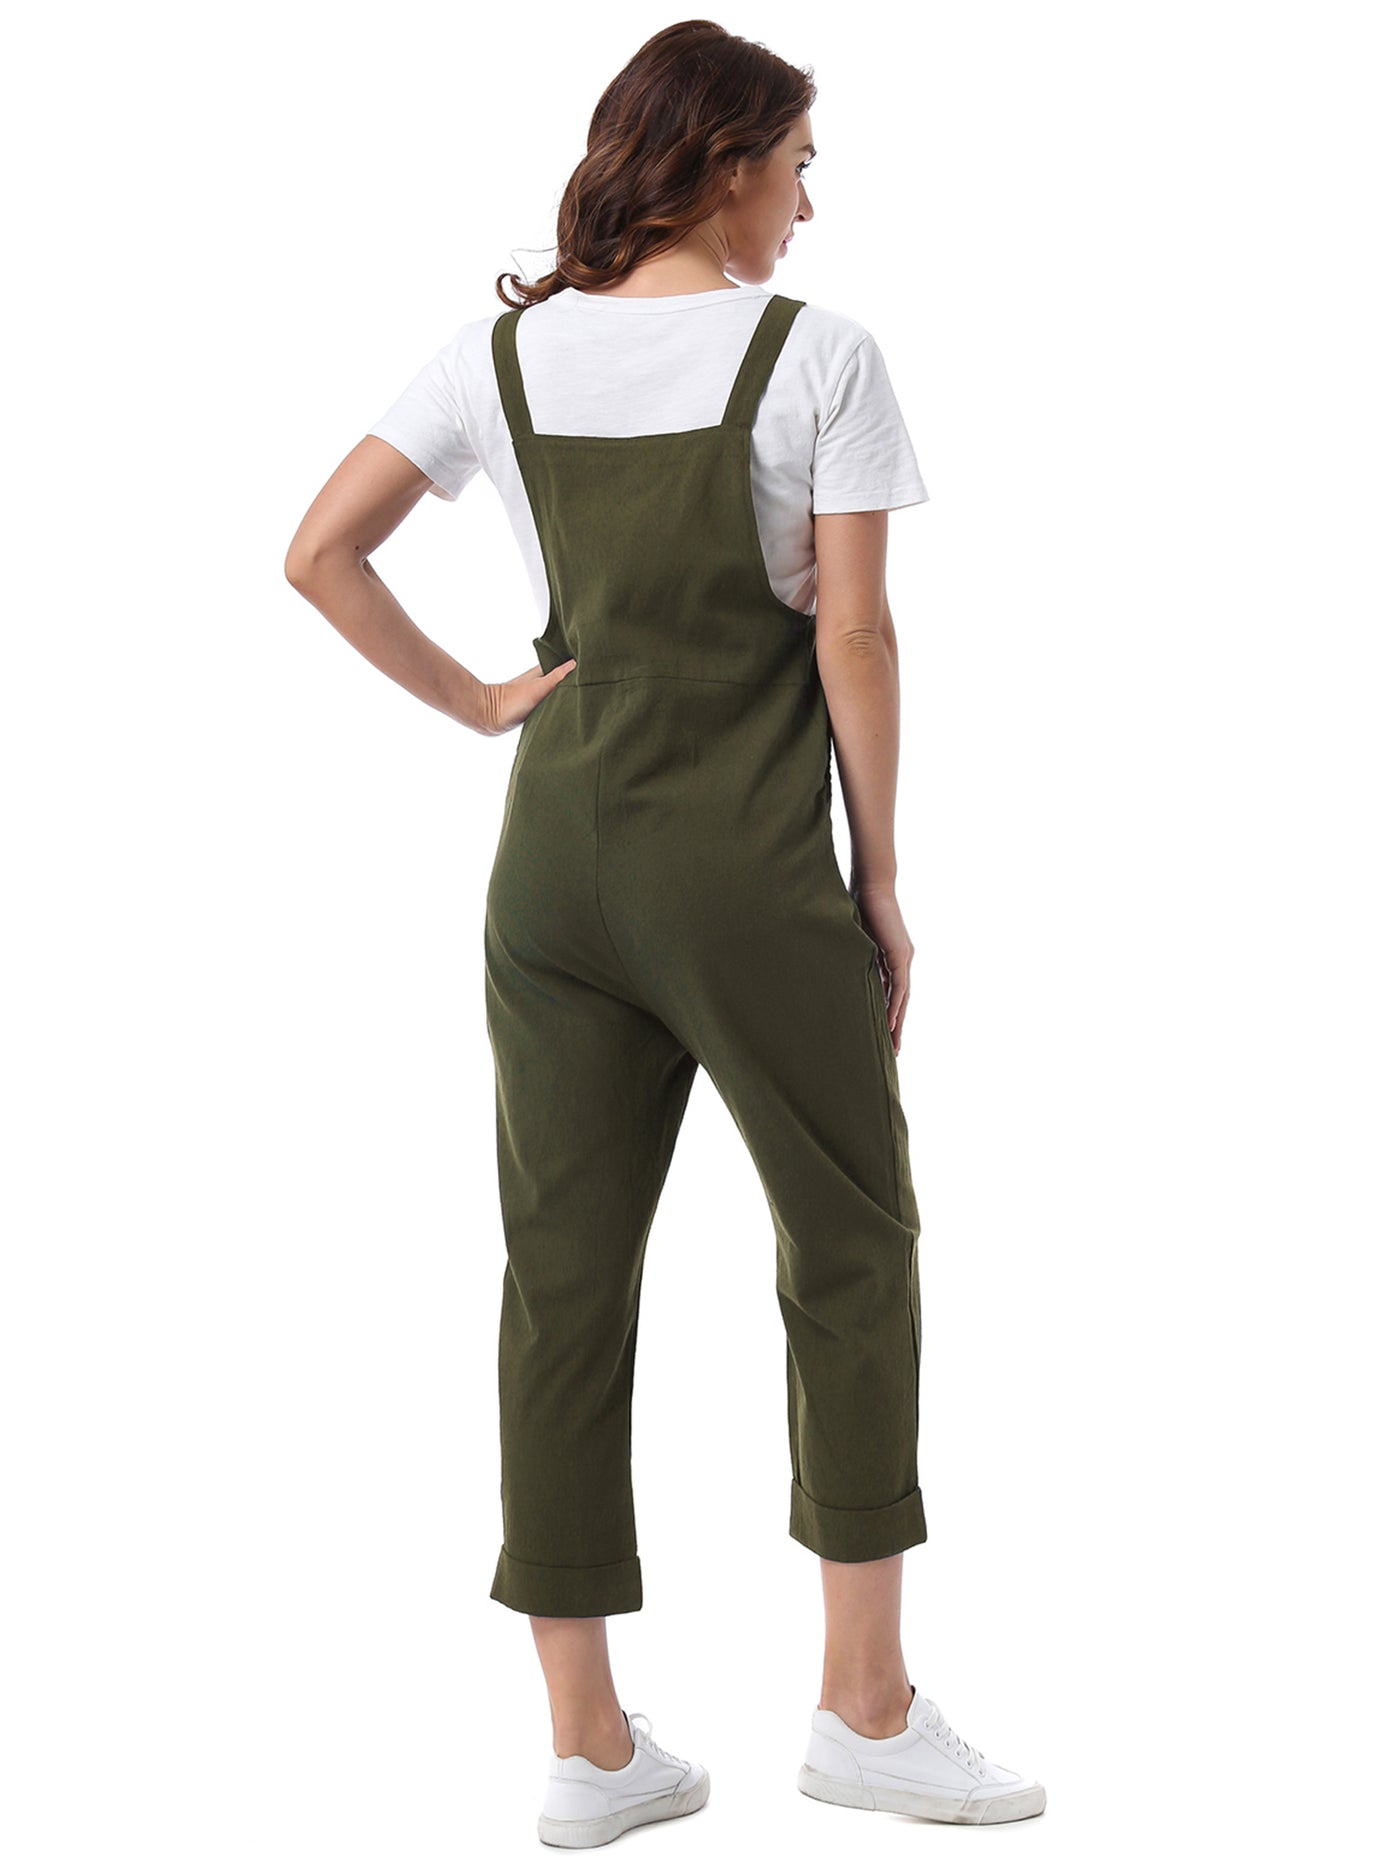 Allegra K Summer Cotton Pockets Casual Sleeveless Baggy Loose Jumpsuits